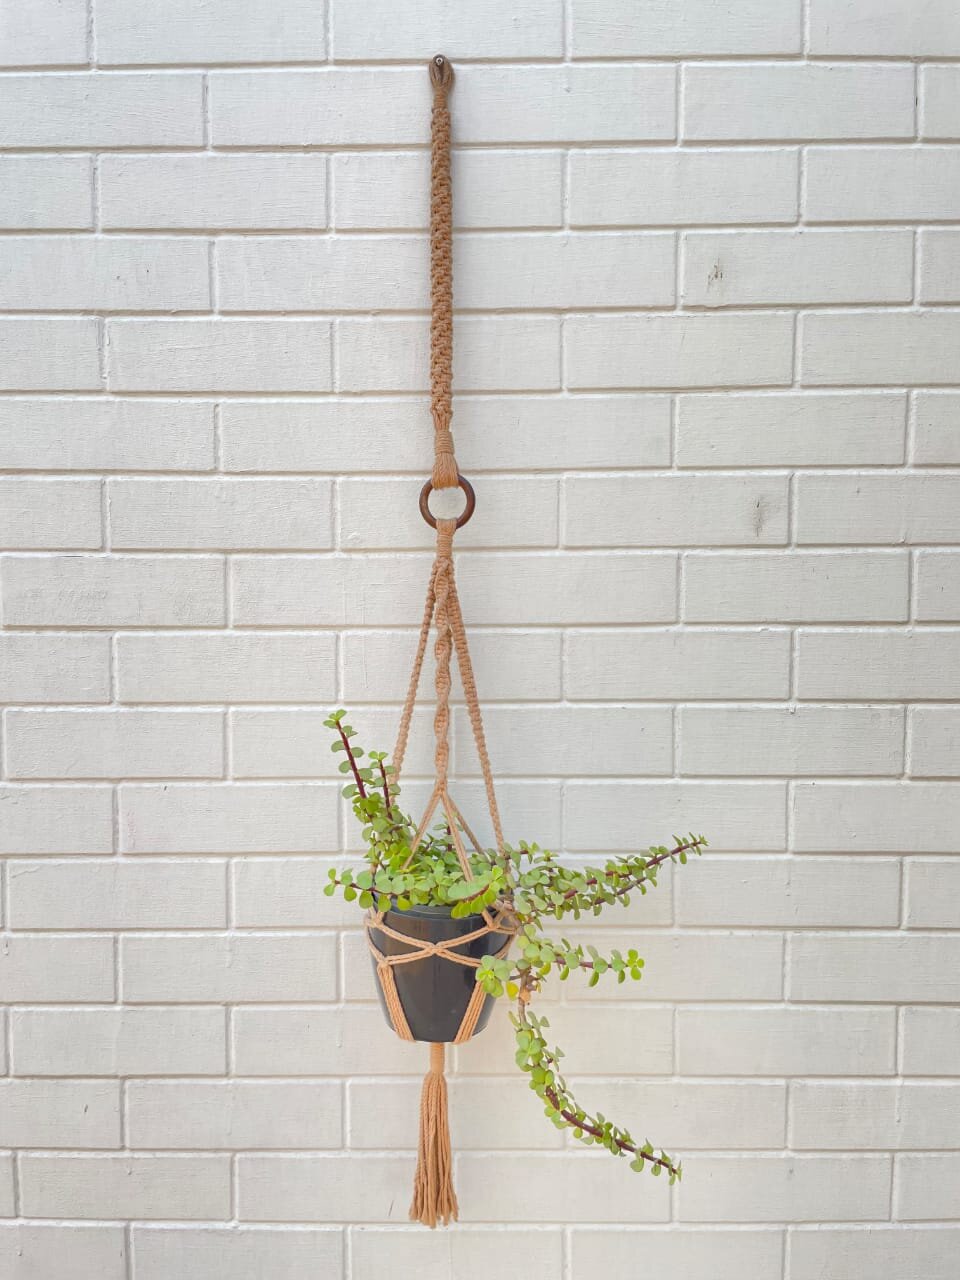 Handcrafted Knotted Natural Macramé Cotton Plant Hanger